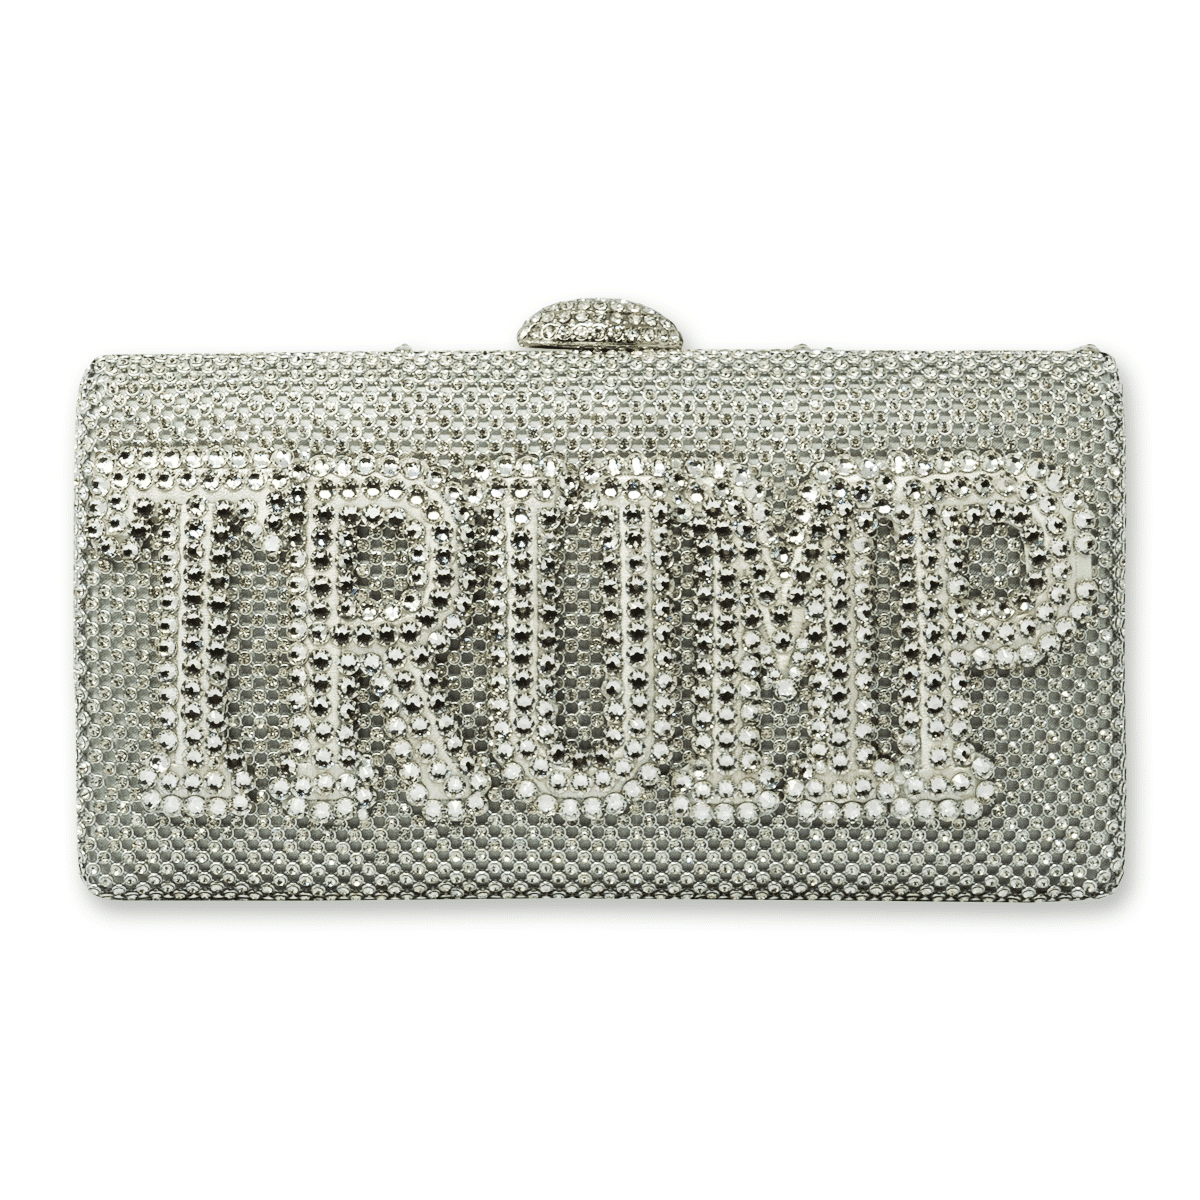 Image of Bling Clutch - Silver